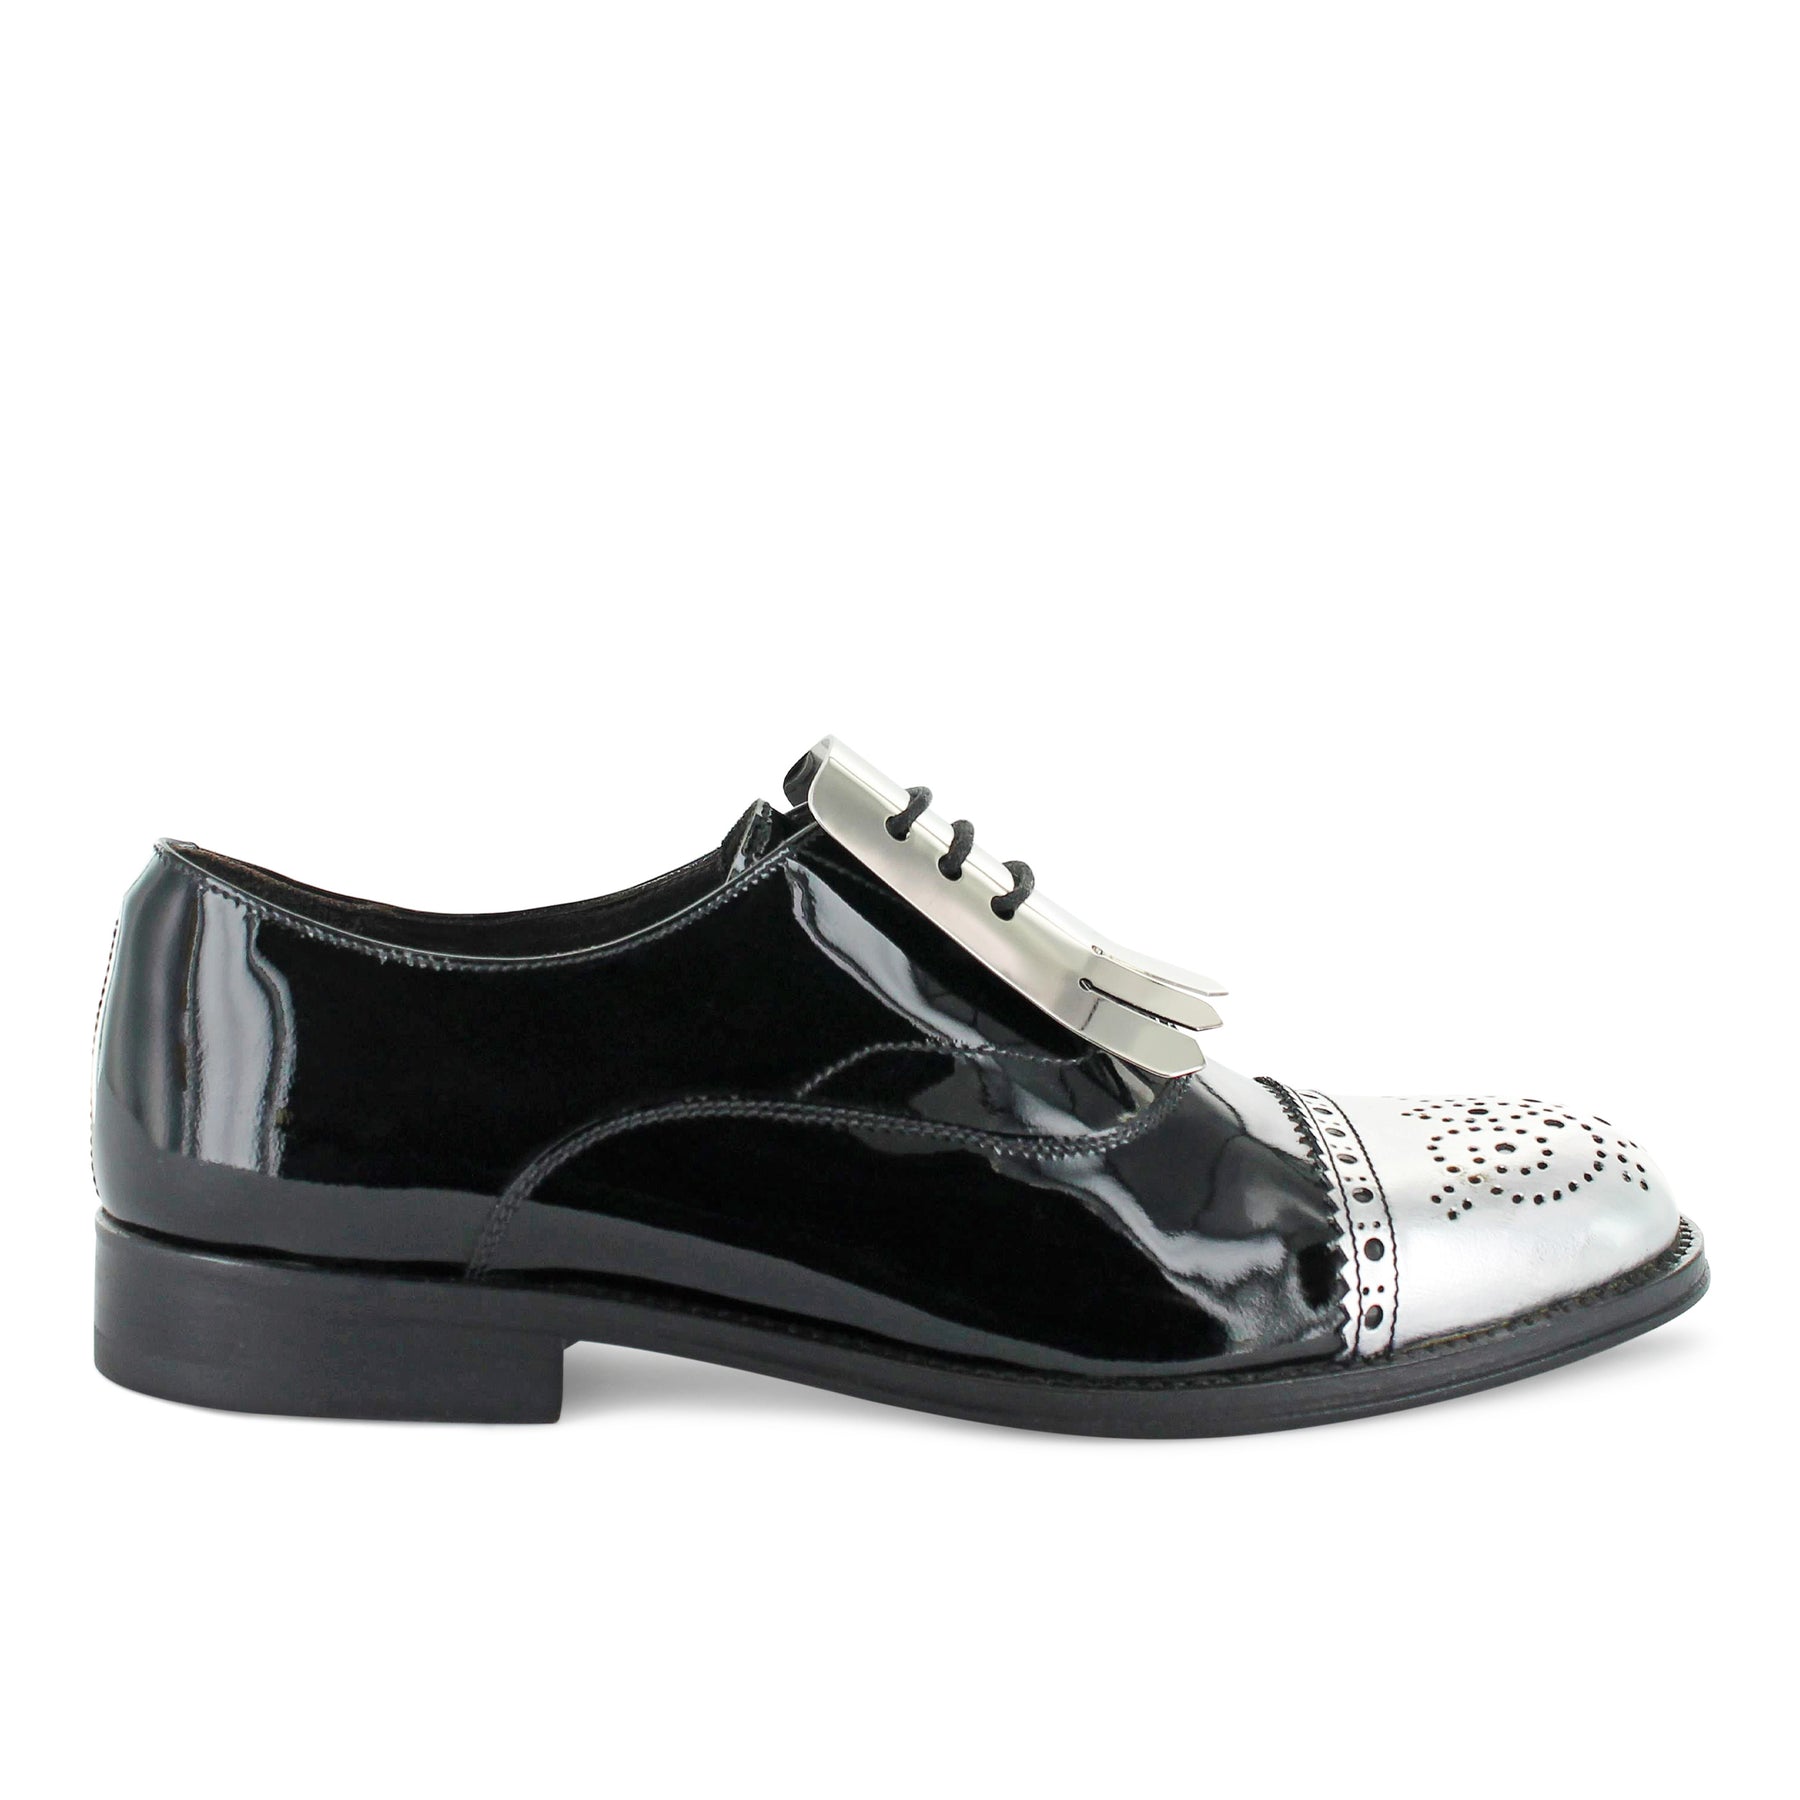 15537 - Black Brogue With Silver Fringe